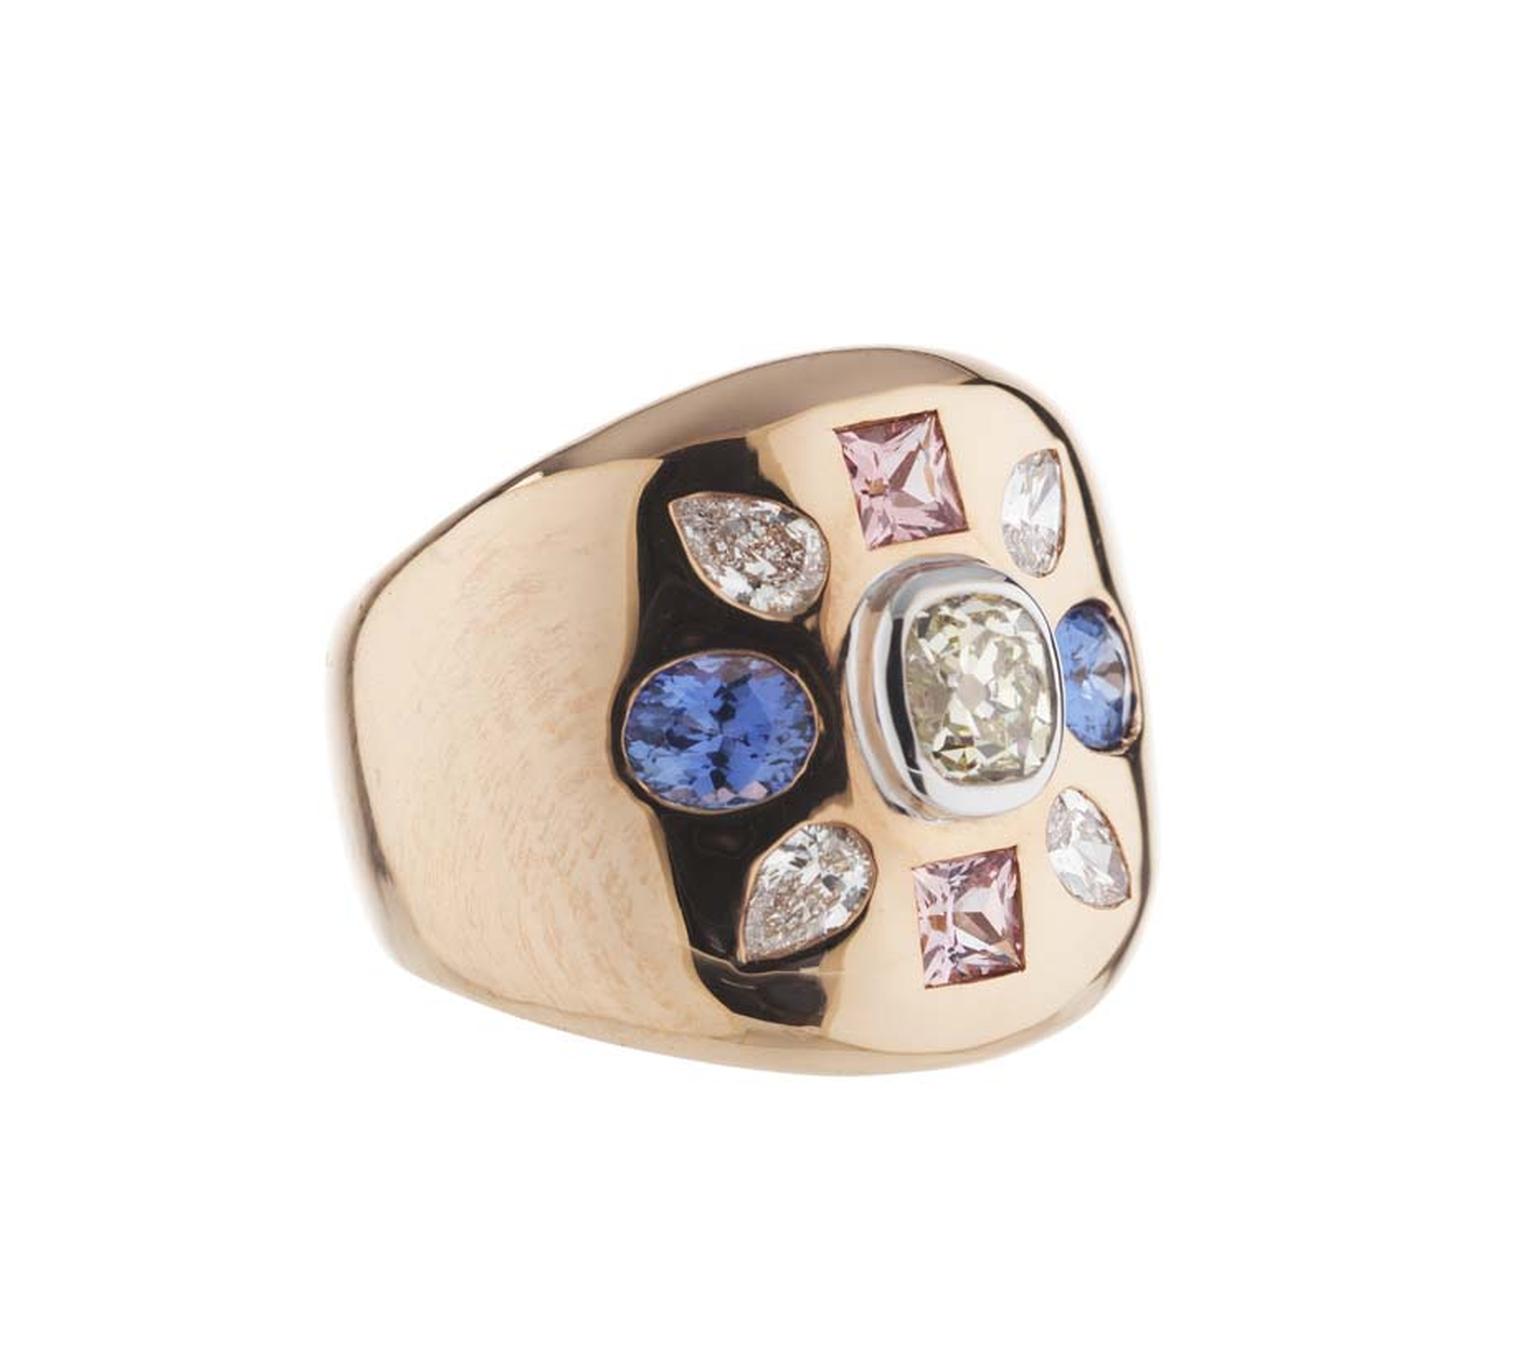 Holts London rose gold Empire ring set with diamonds and pink and blue sapphires (£4,750).